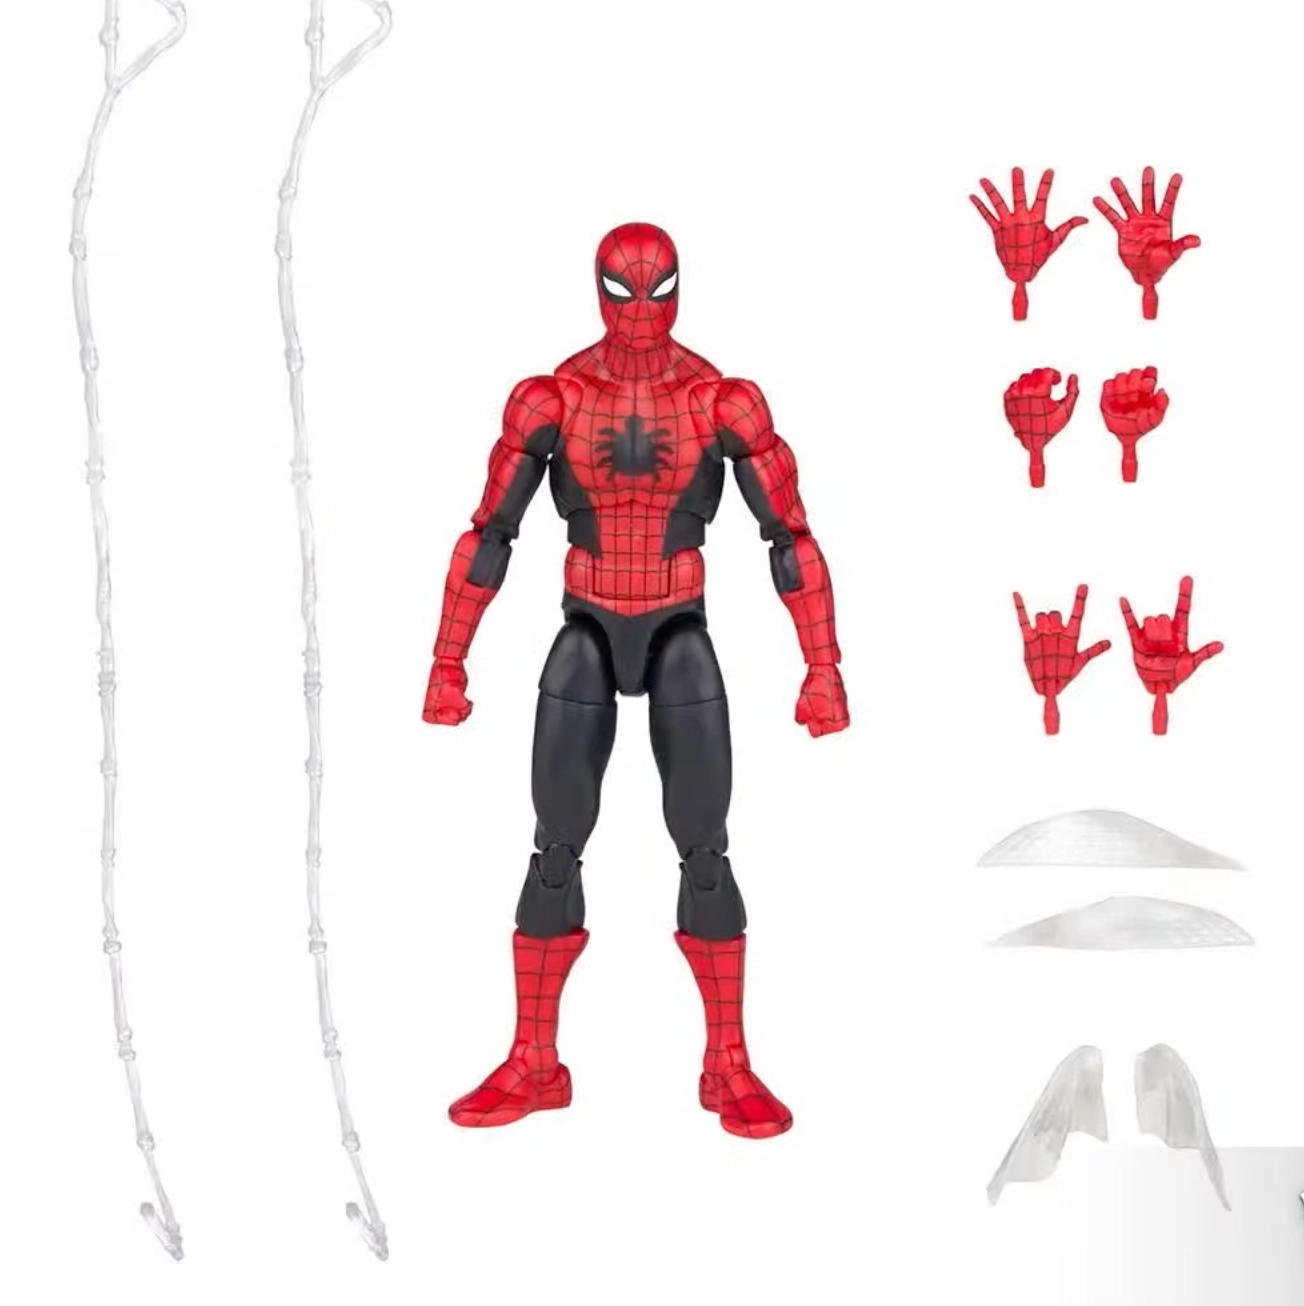 Amazing Fantasy #15 Spider-Man figure with items